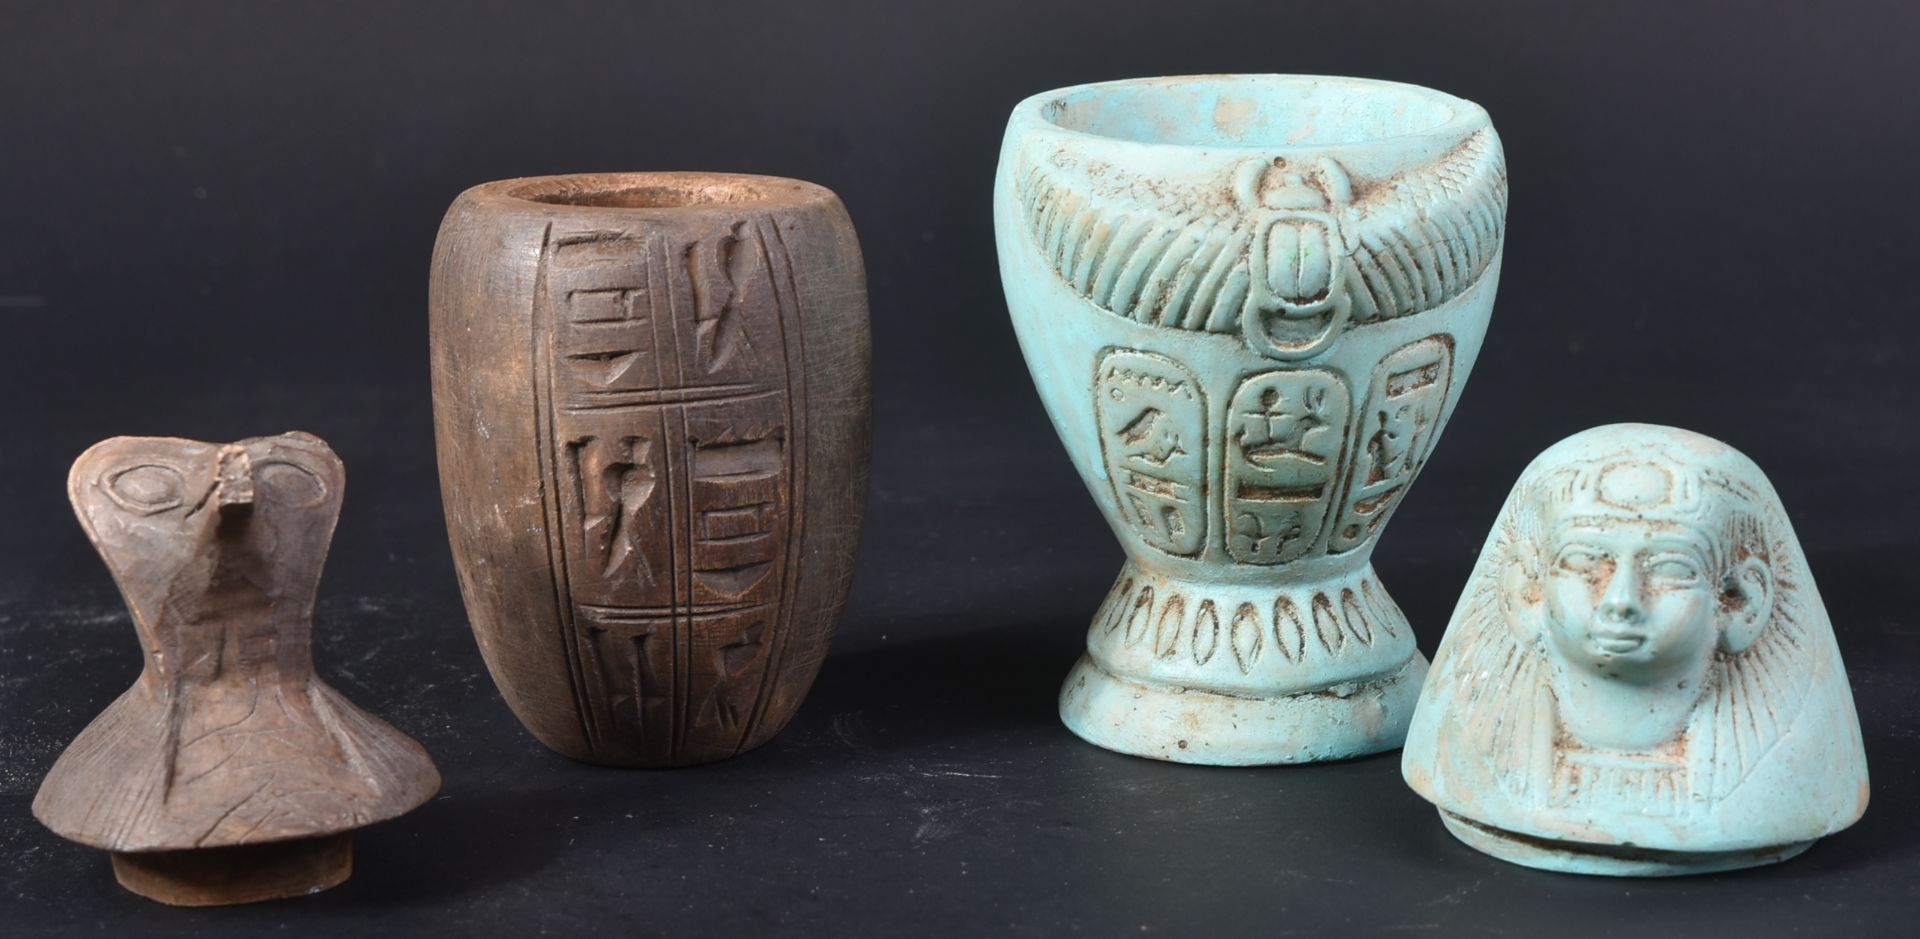 TWO EGYPTIAN CANOPIC JARS - Image 4 of 4